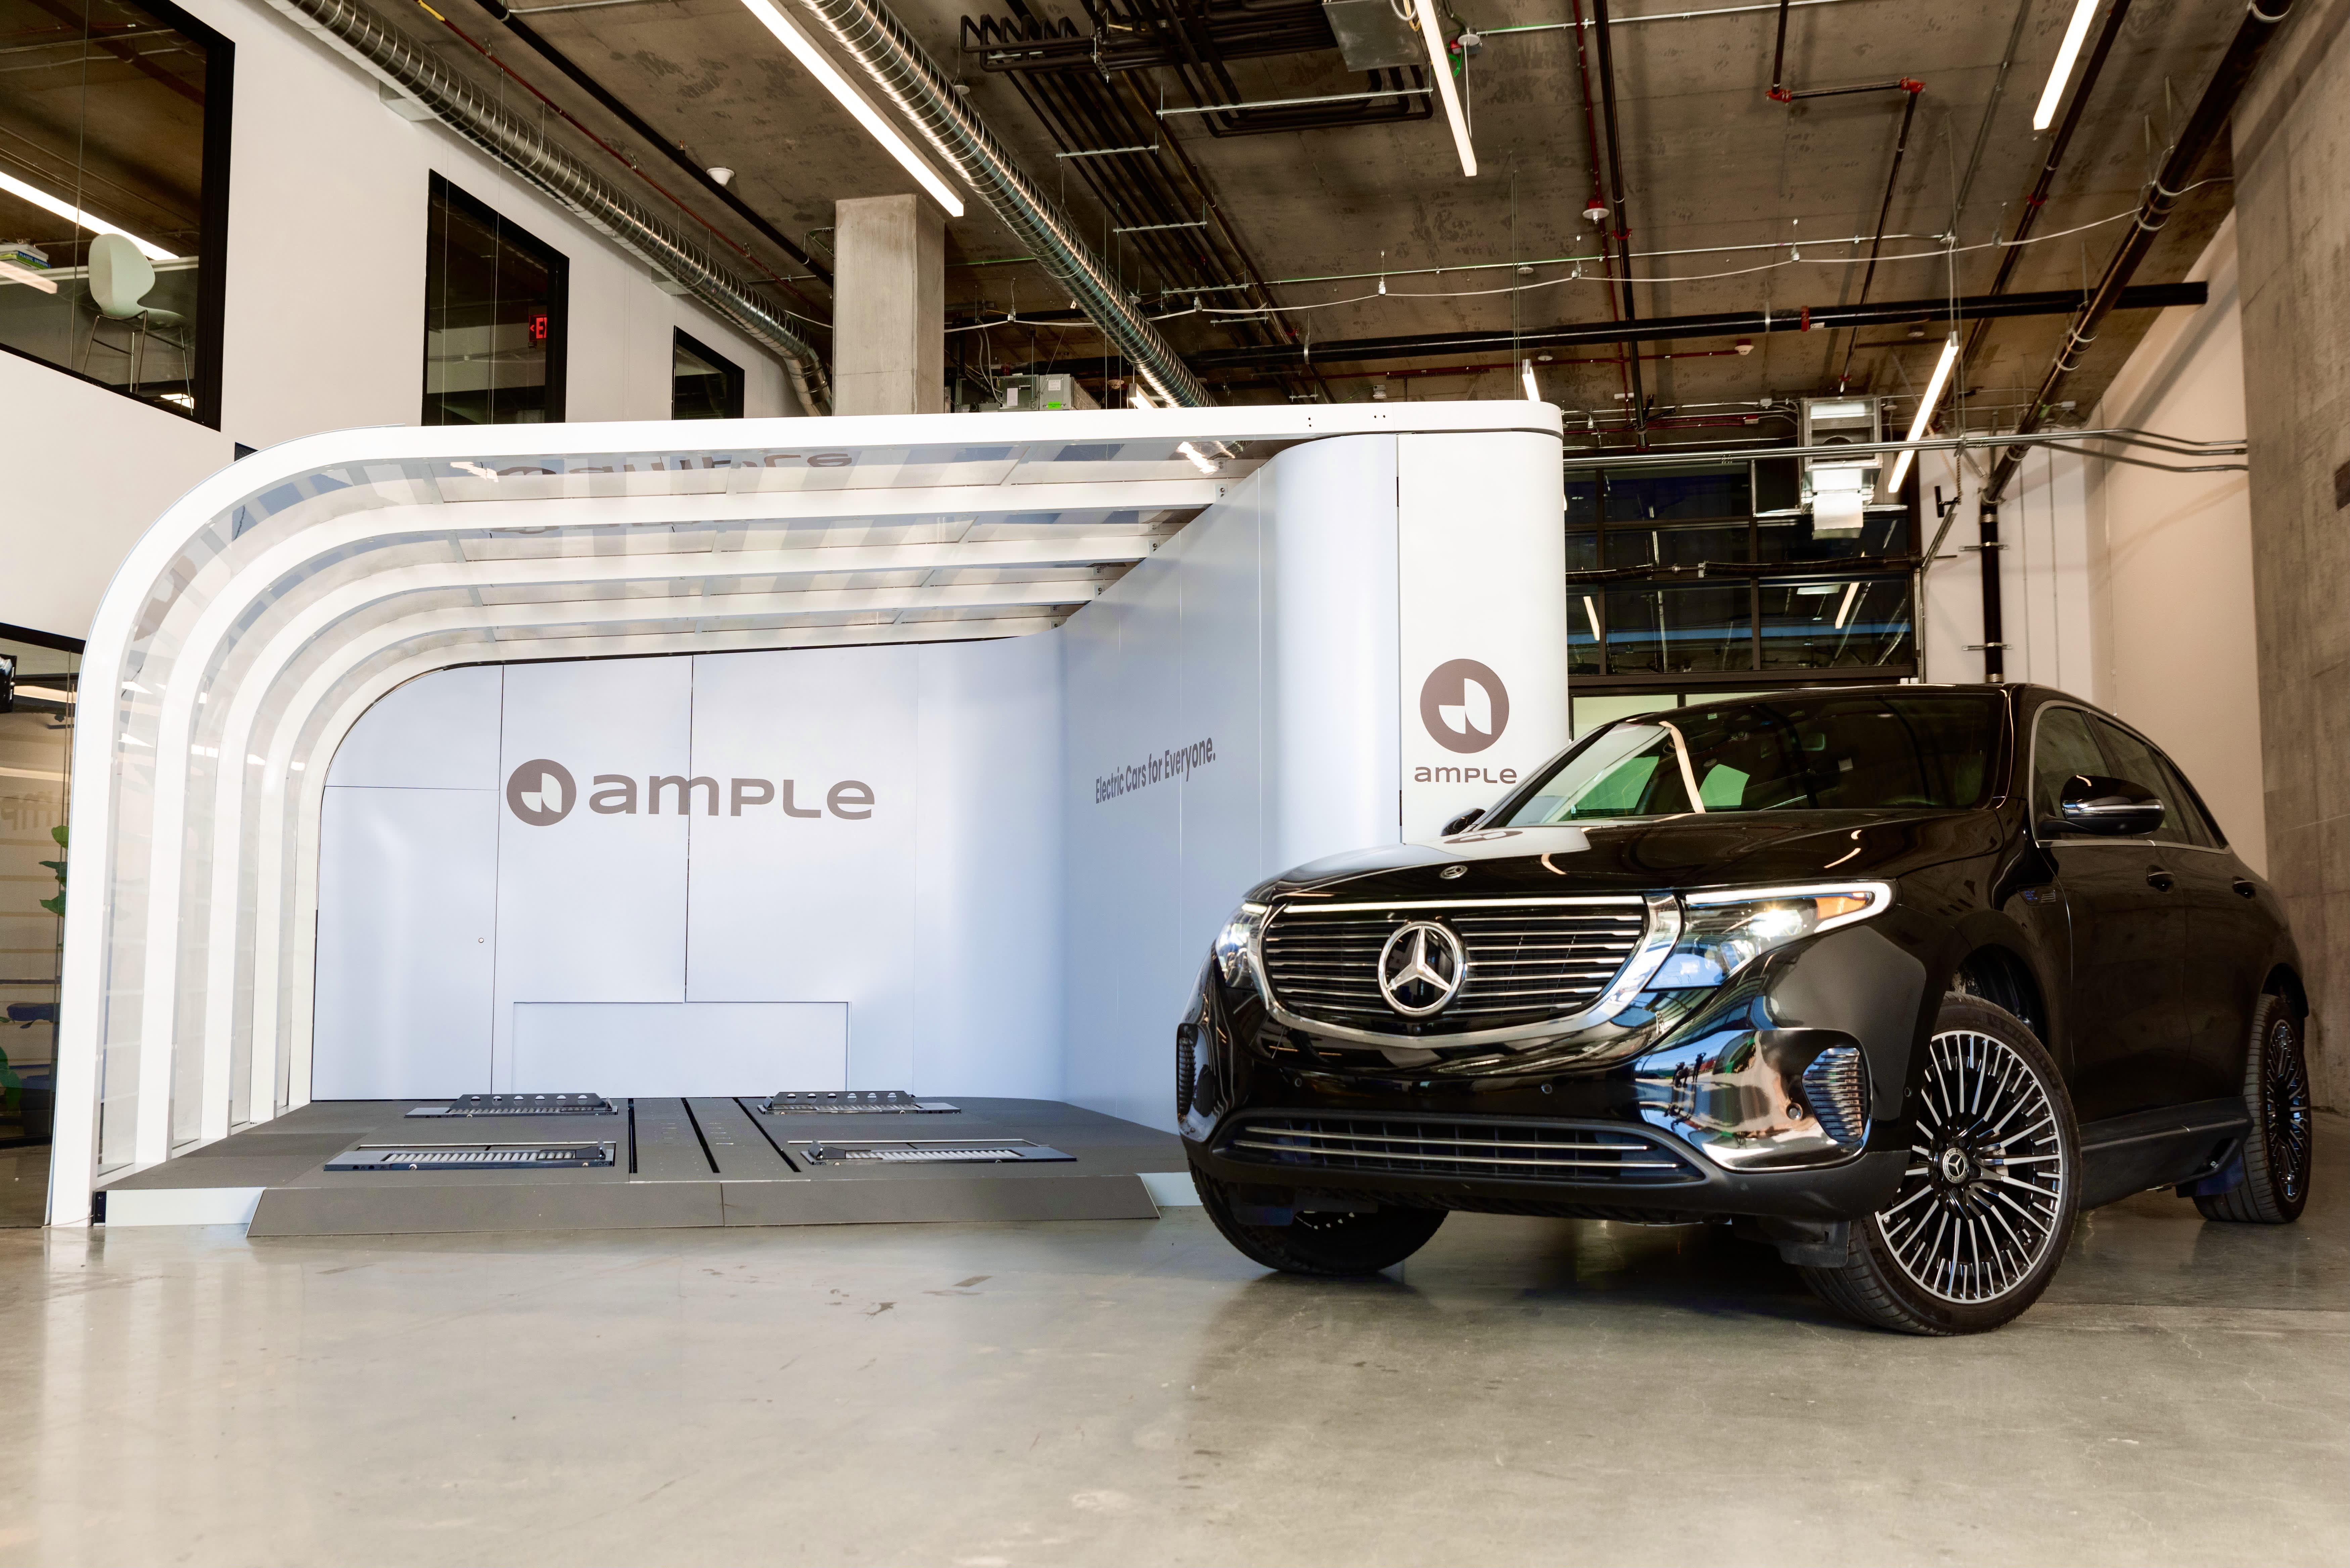 Ample opens 5 EV battery replacement stations for Uber Bay Area drivers